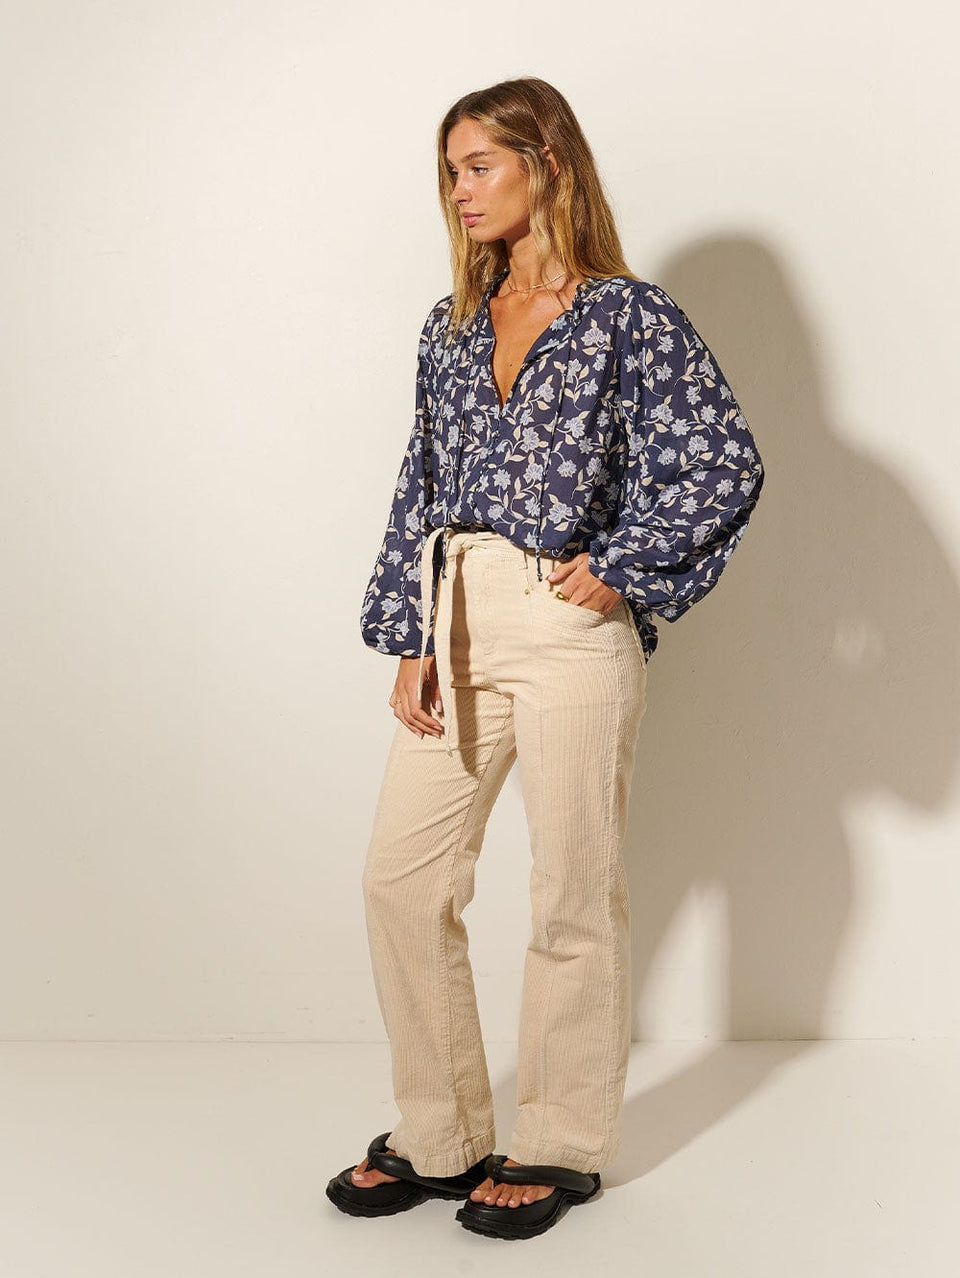 Studio model wears KIVARI Jeanne Blouse: A navy and sky blue floral blouse made from cotton and featuring a button front, full-length blouson sleeves and frill collar detail.